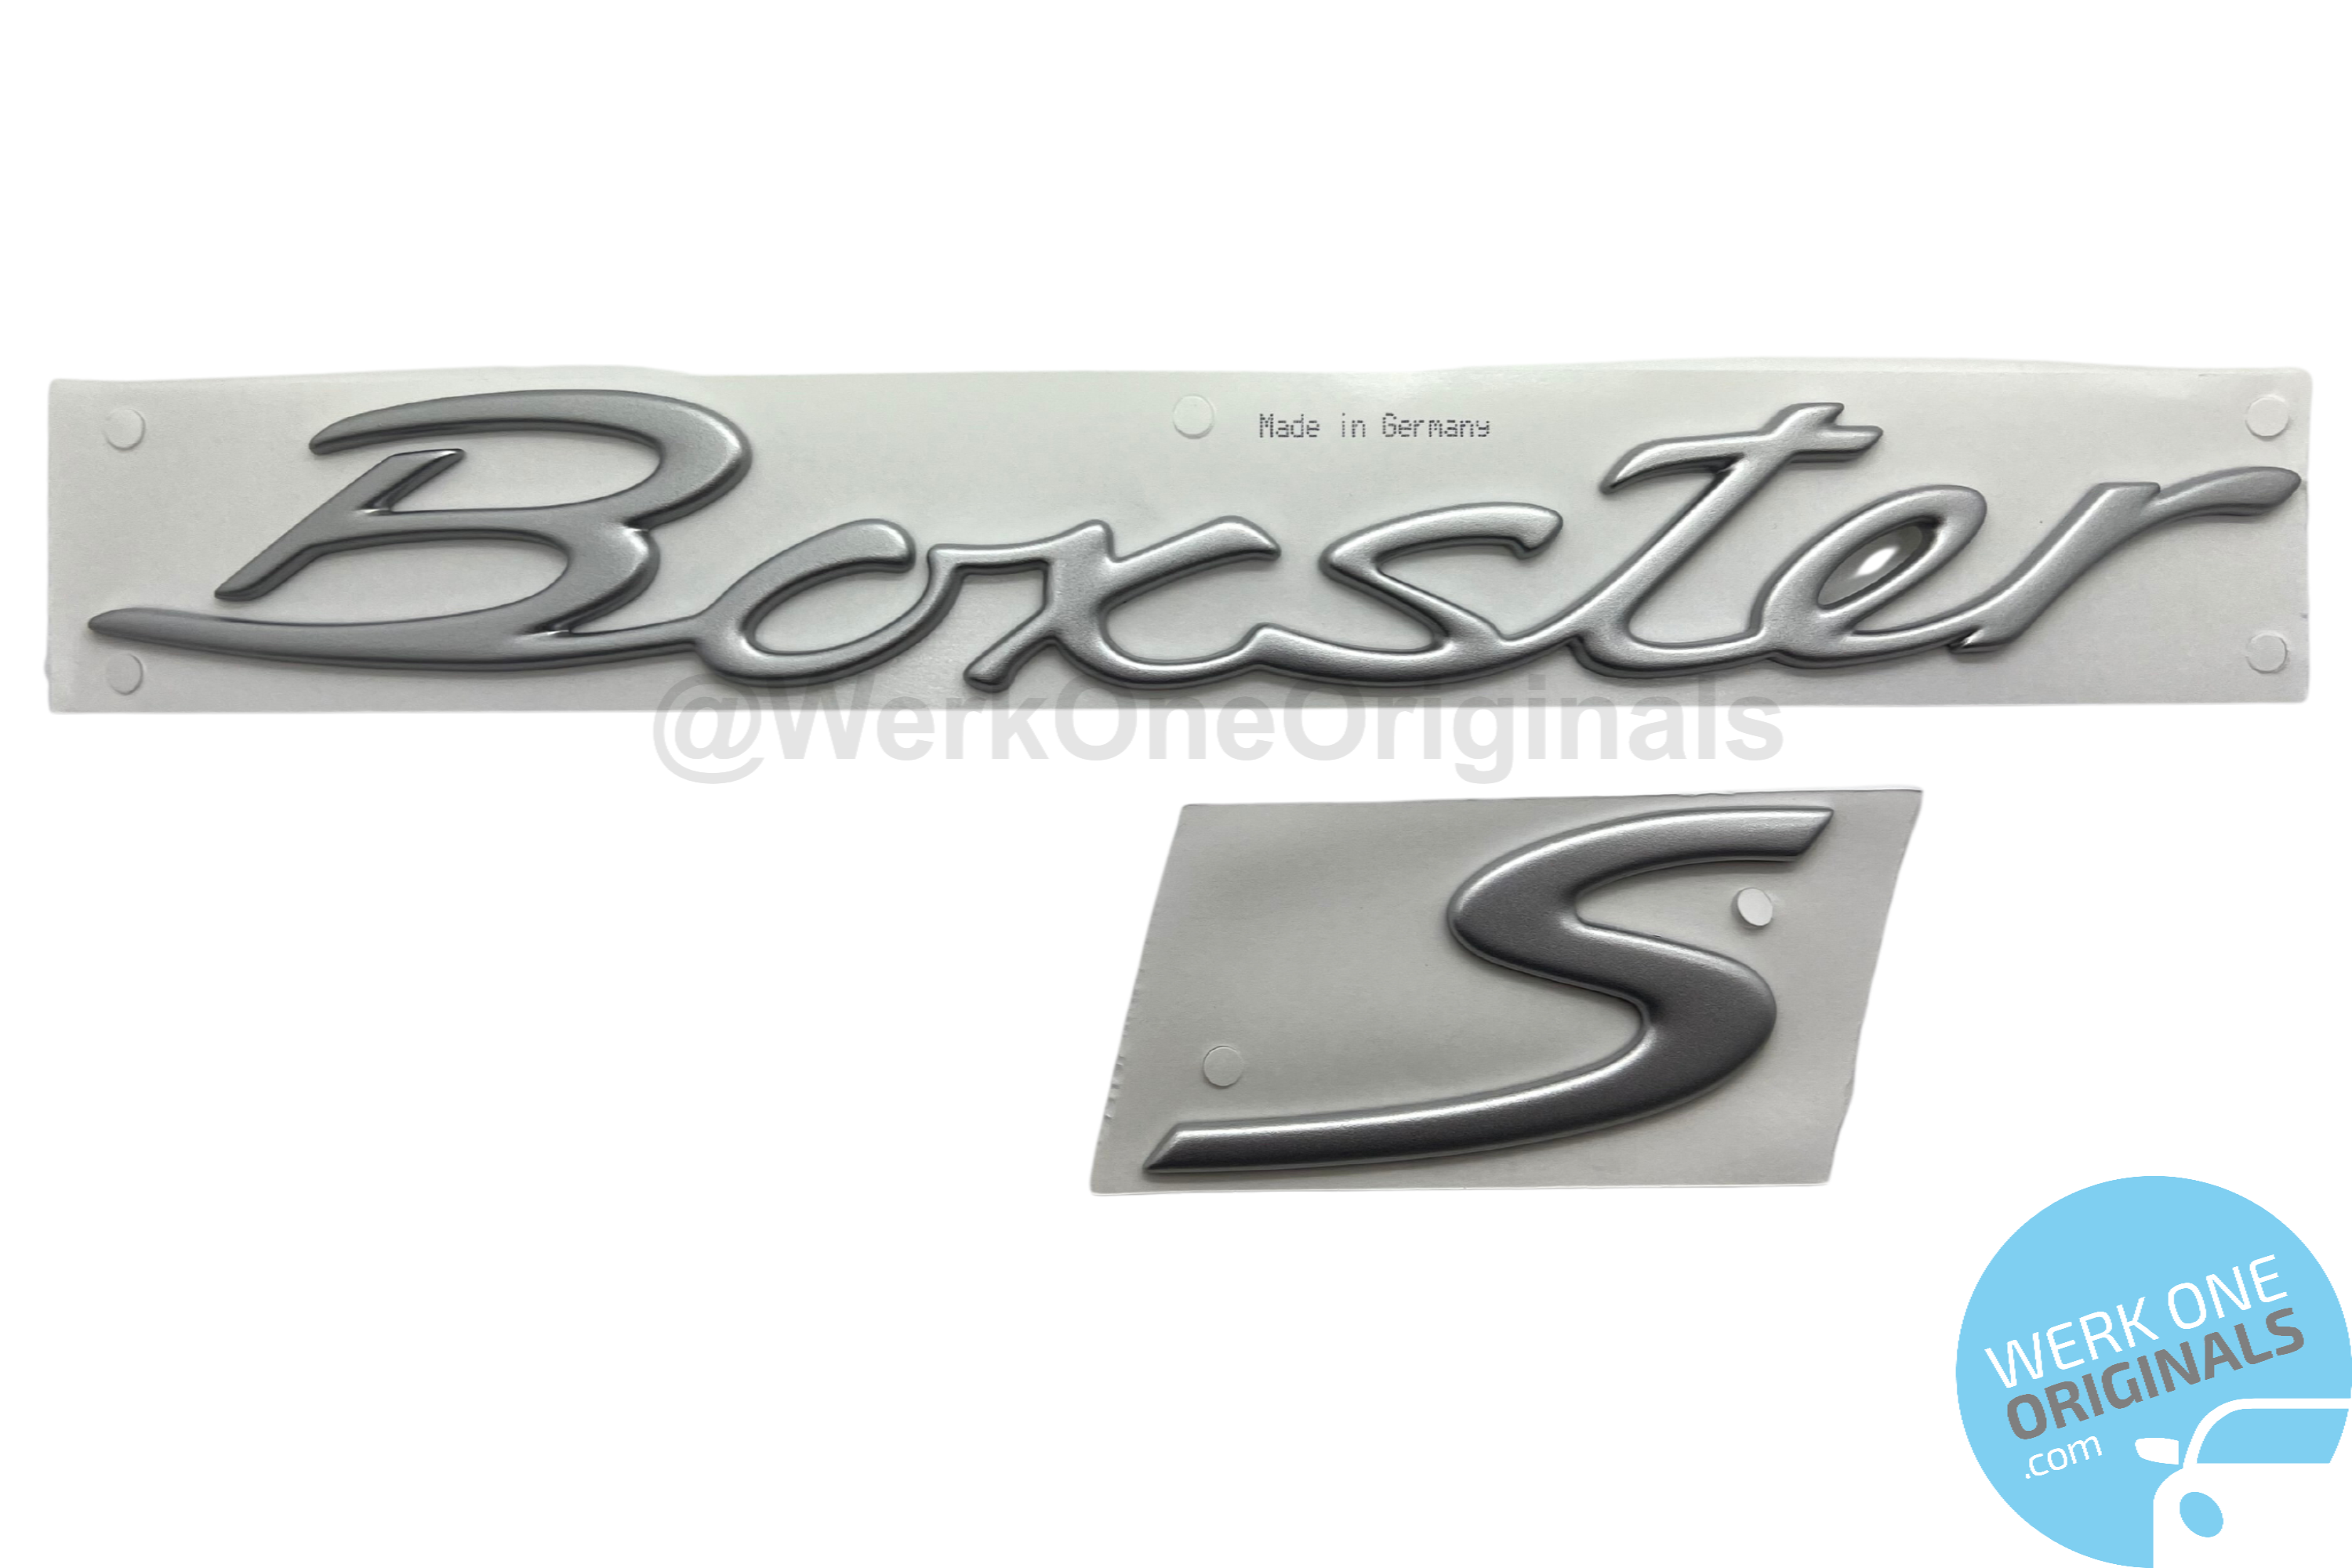 Porsche Official 'Boxster S' Rear Badge Decal in Matte Silver for Boxster S Type 986 Models